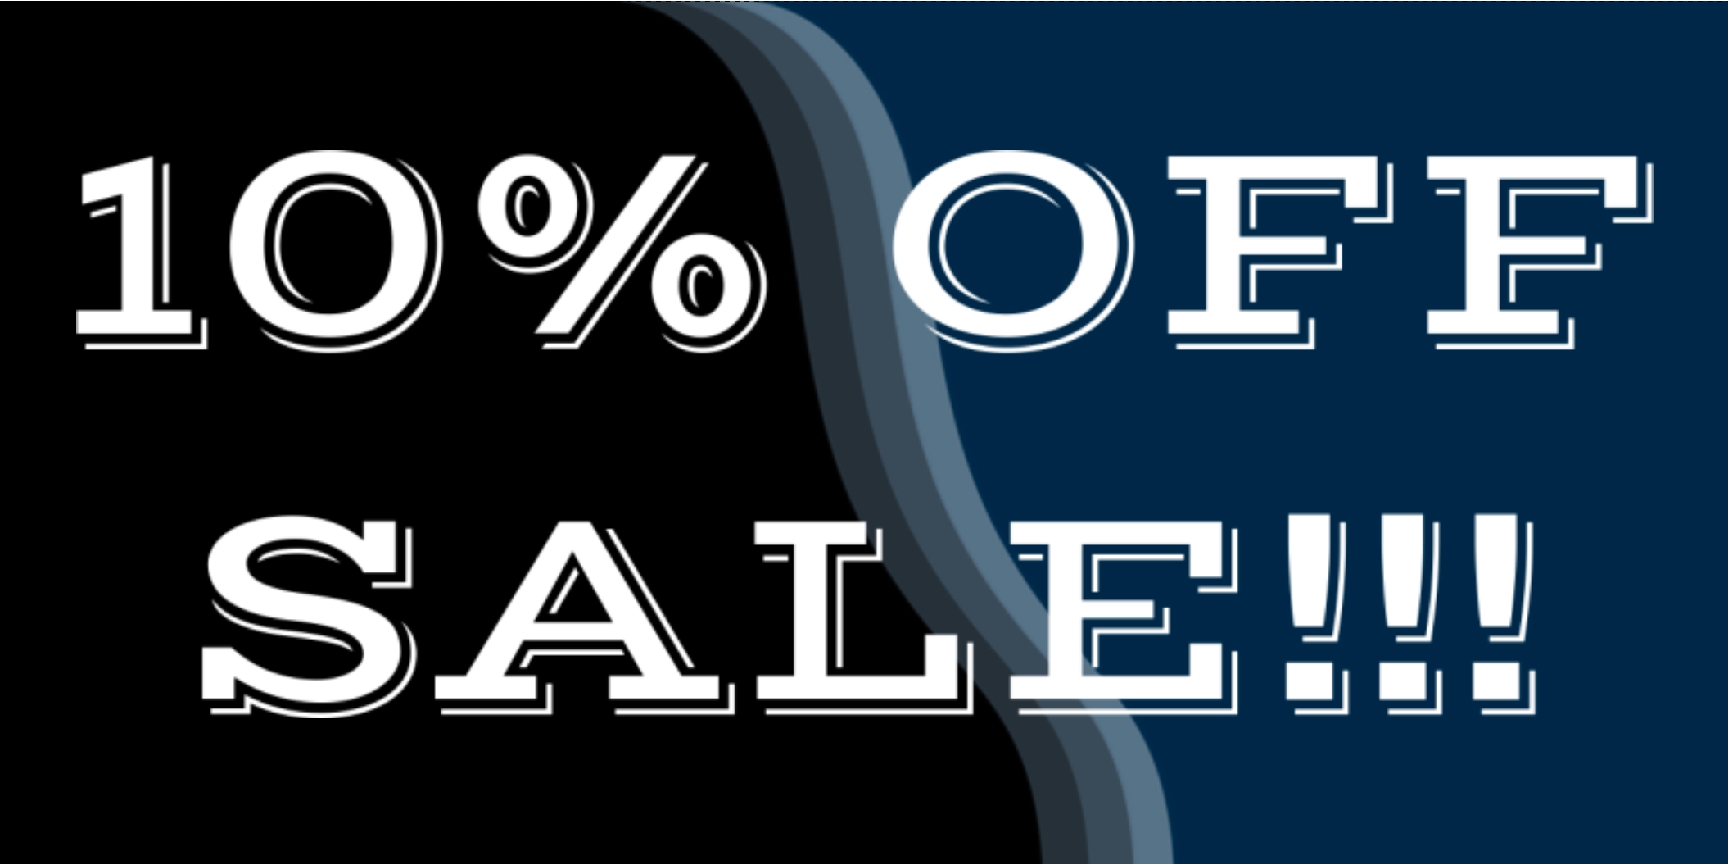 10% off Sale event banner